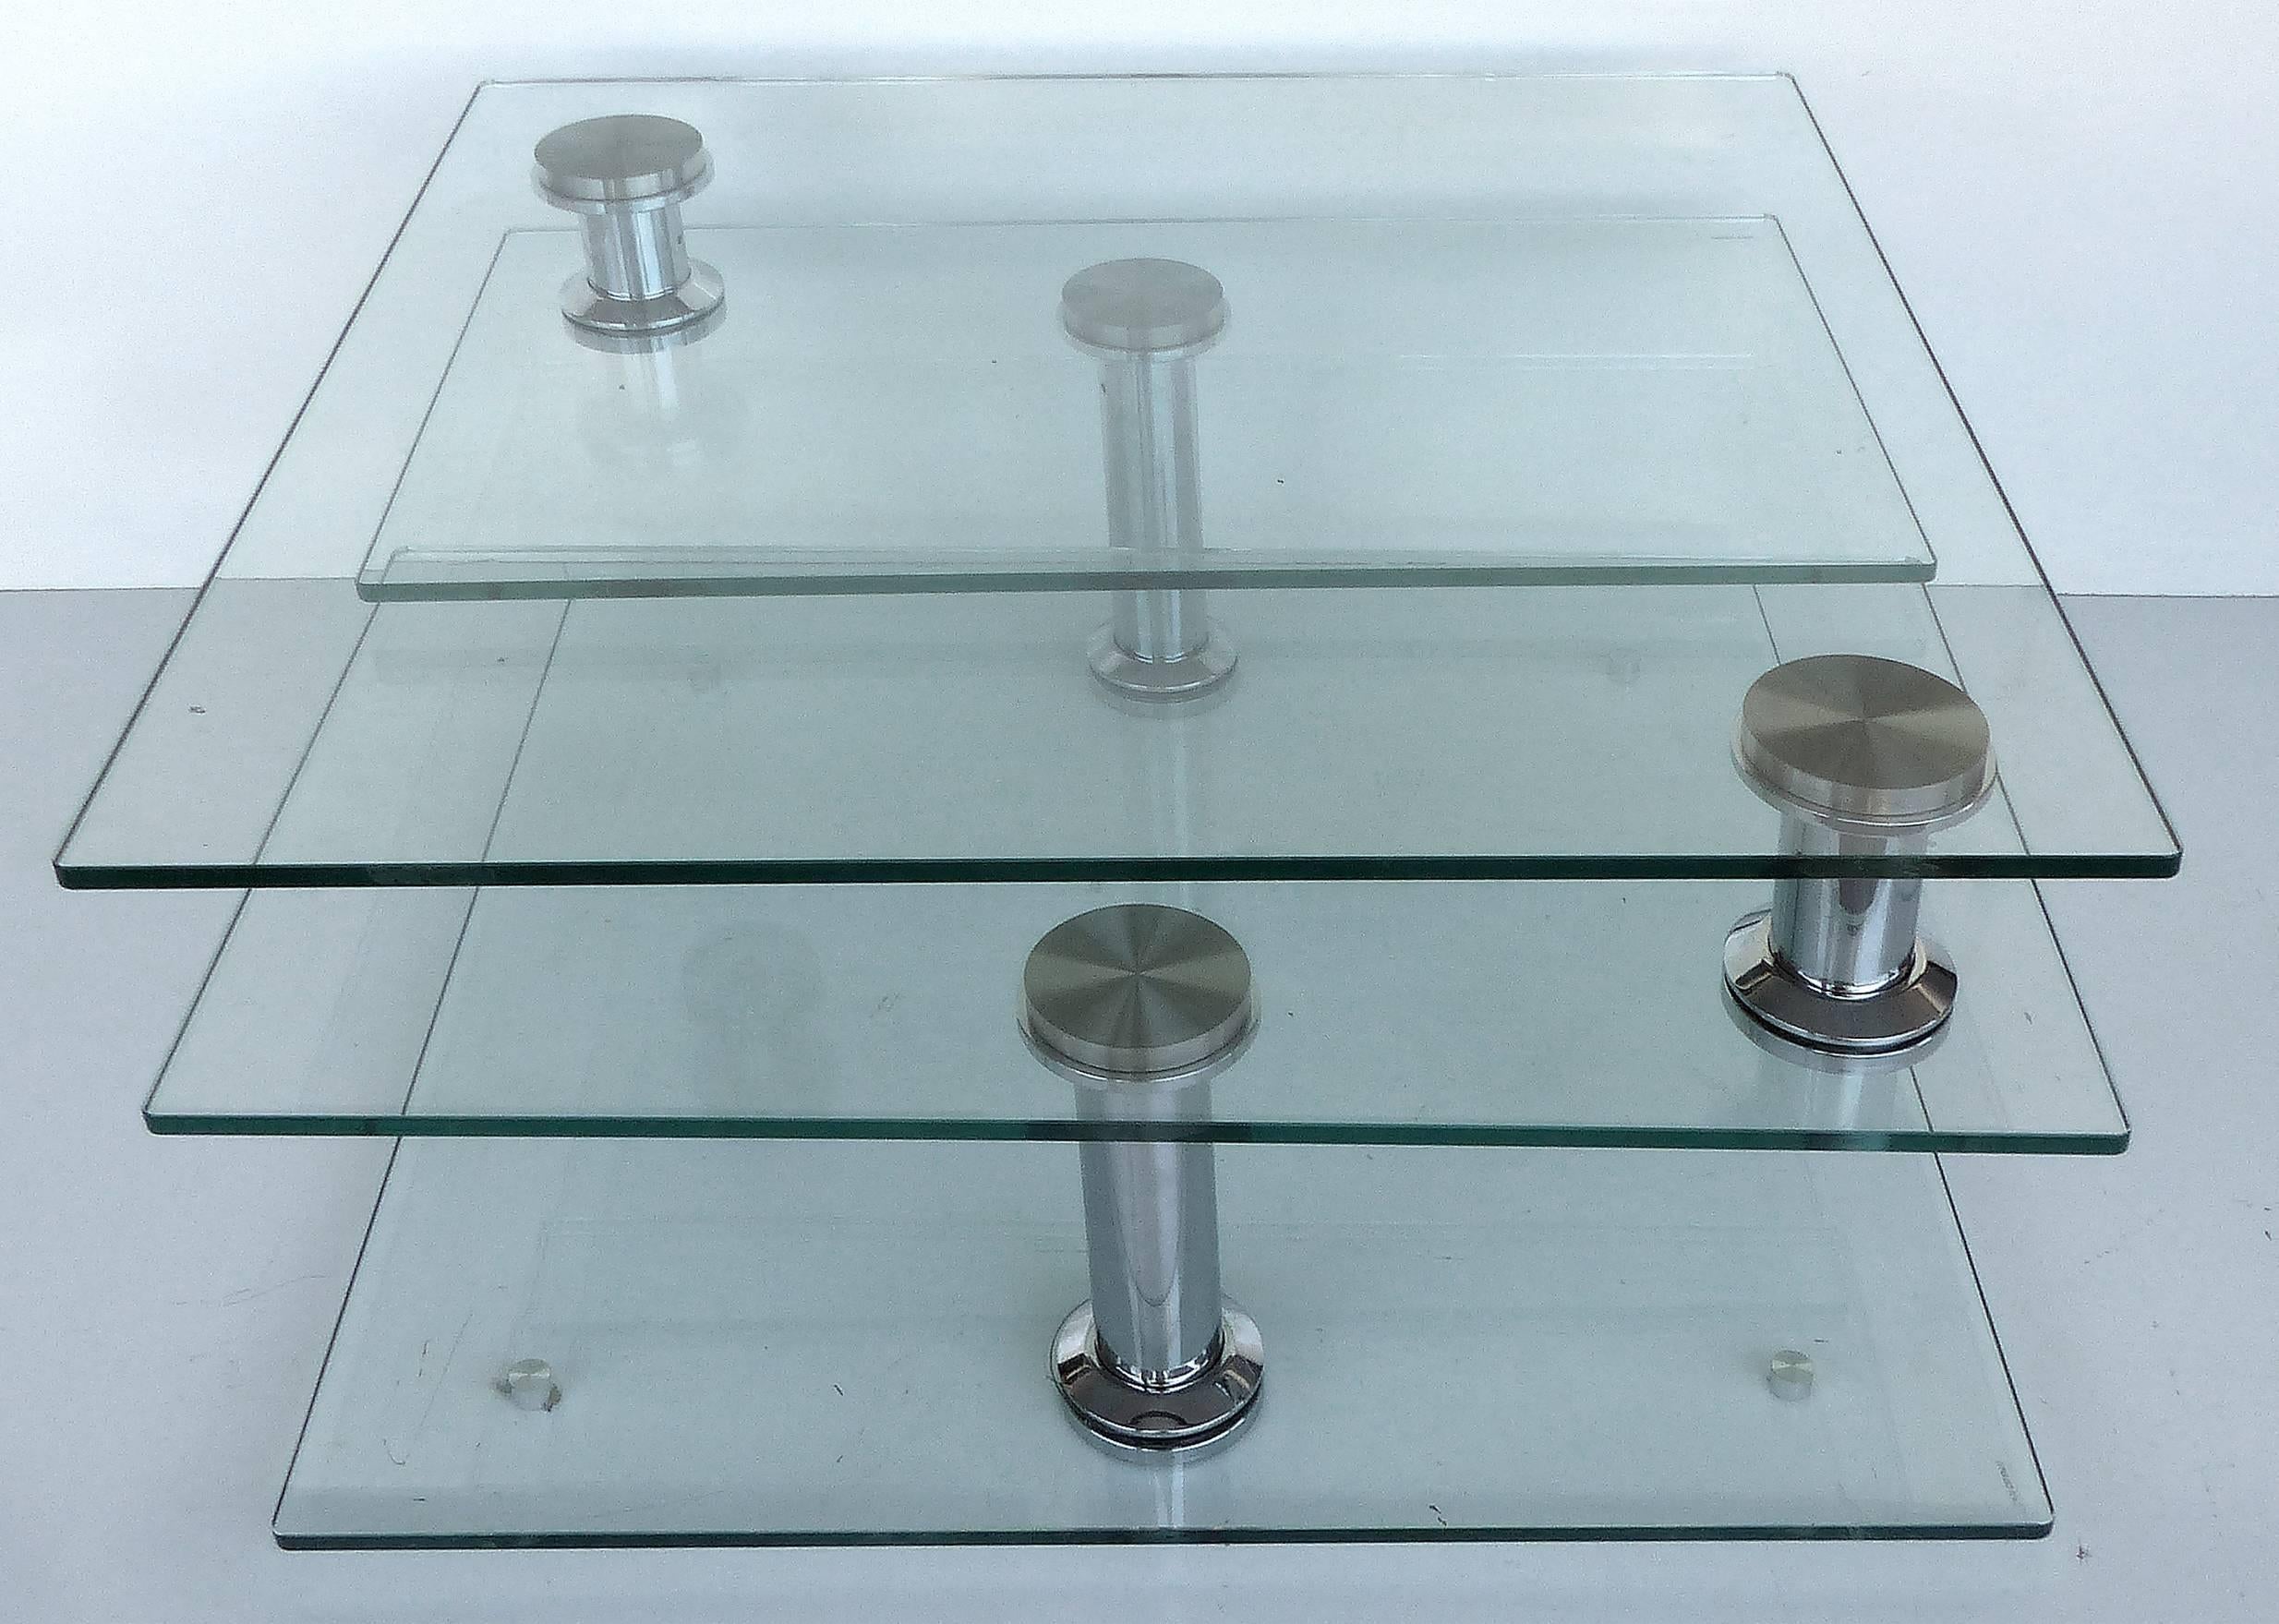 A versatile Mid-Century Modern metamorphic tempered glass and chrome square coffee table. A rare model which rotates smoothly to create a number of different configurations. Measurements given are in the closed position as seen in the second